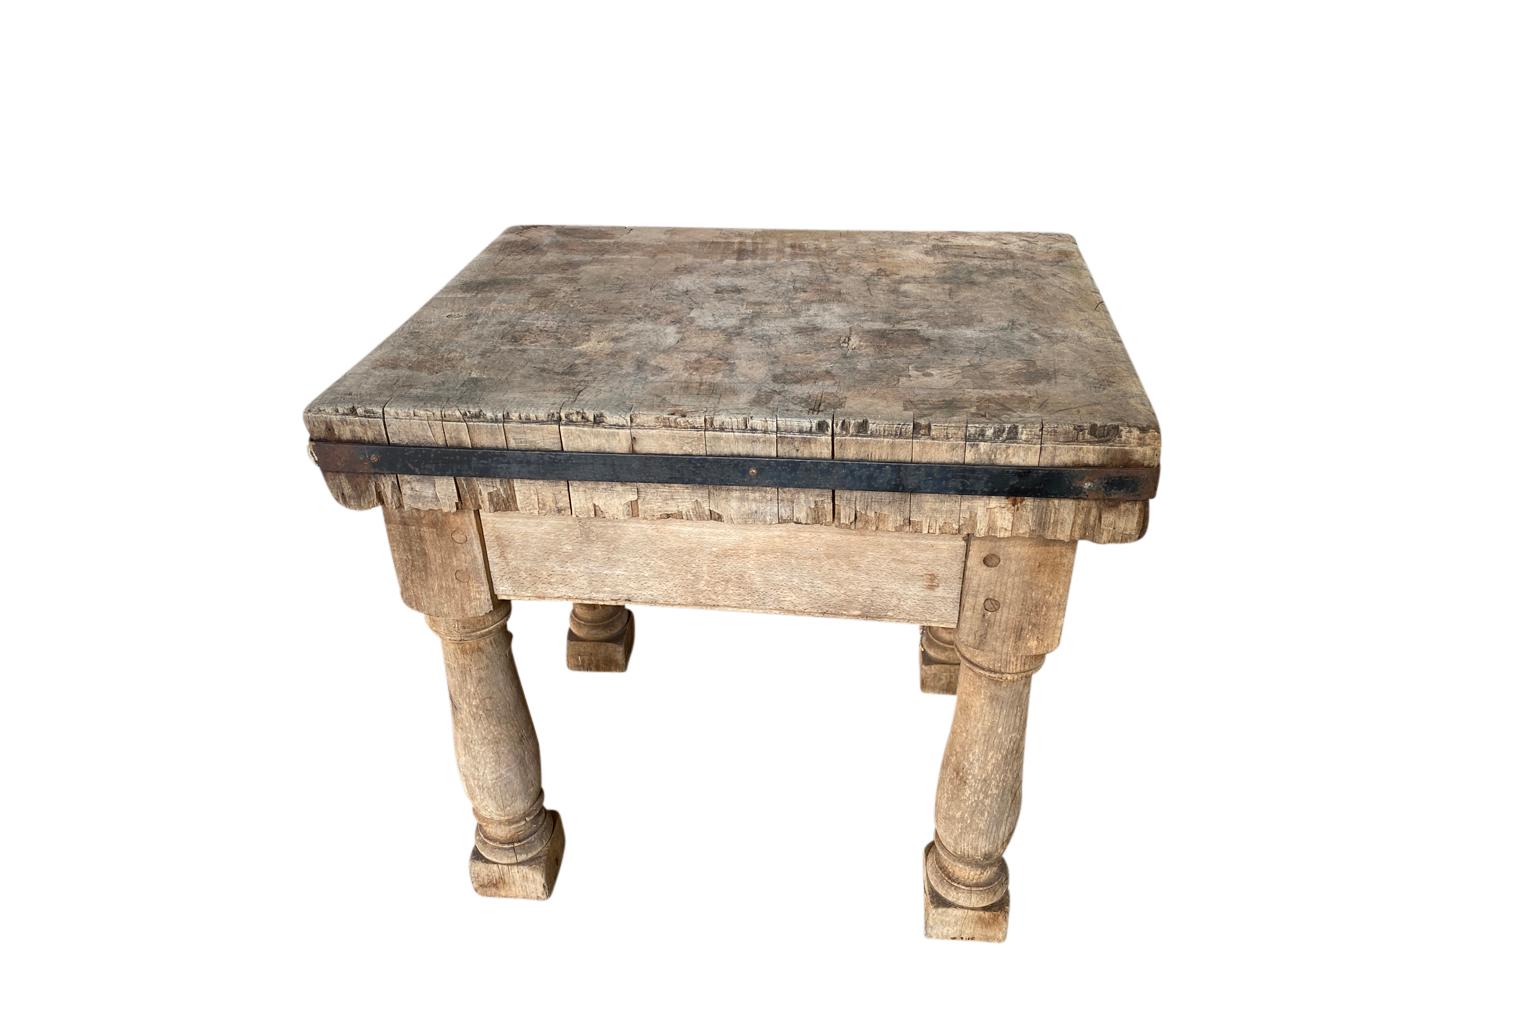 A very charming 19th century Billot - Butcher's Block from the South of France.  Soundly constructed from naturally washed beech with nicely turned legs and an iron band around the chopping block.  A wonderful kitchen island or accent table.  